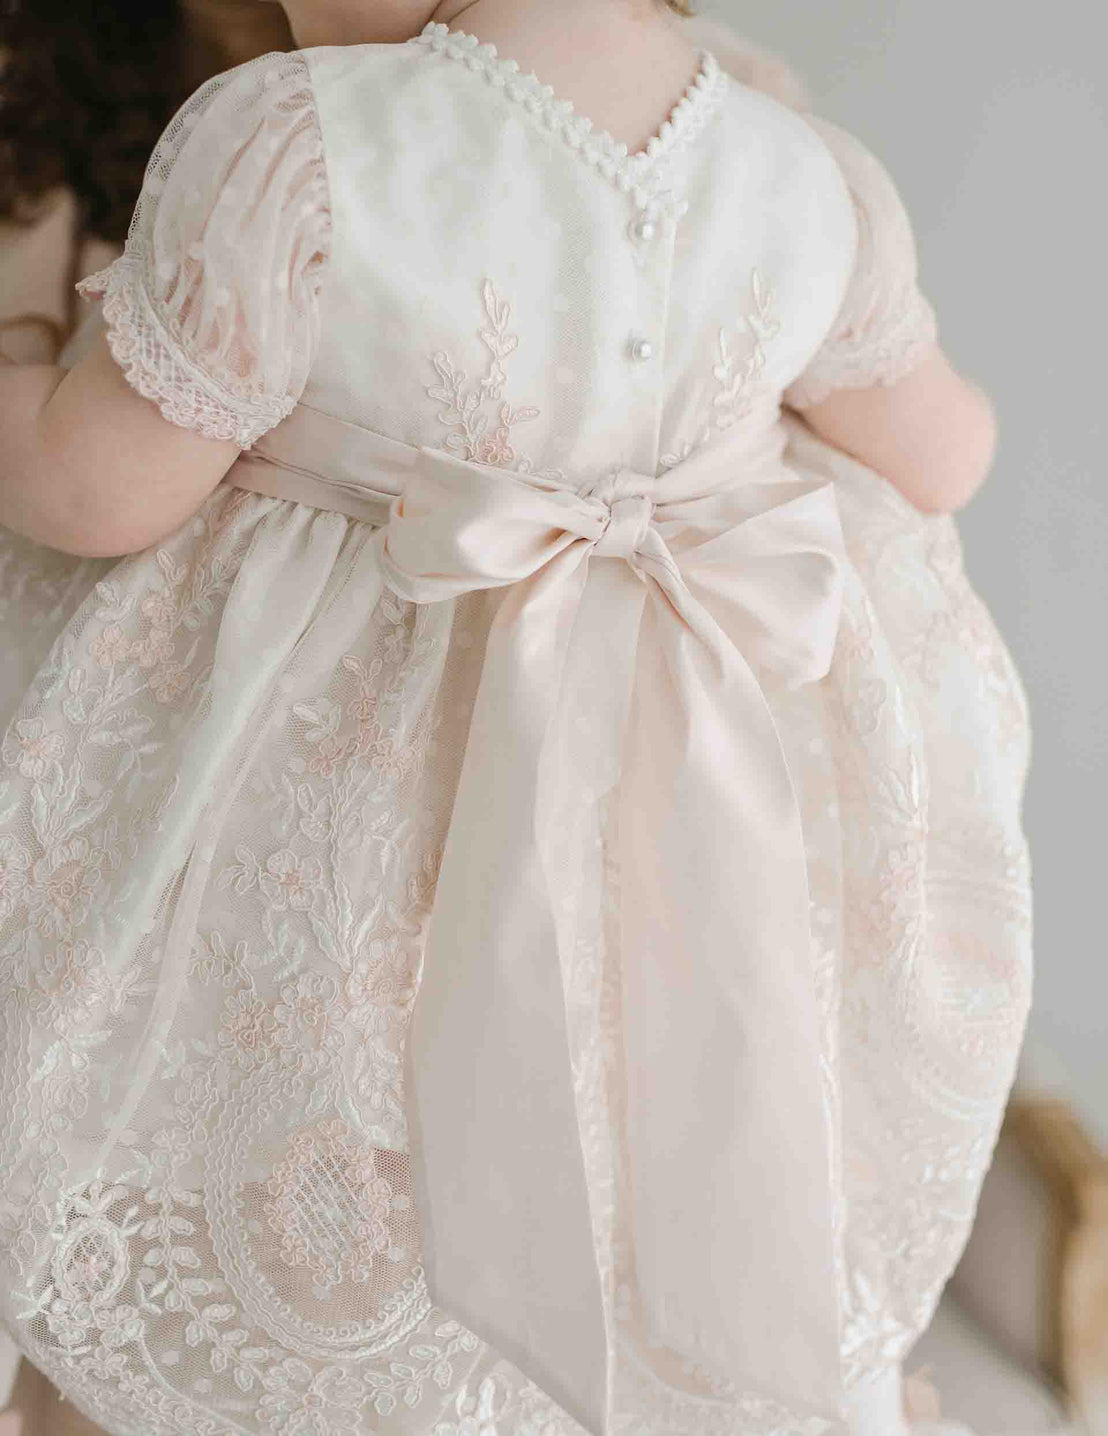 A toddler in an Elizabeth Christening Dress with detailed embroidery and a large satin bow on the back, standing indoors, showing only their back, ready for a baptism.